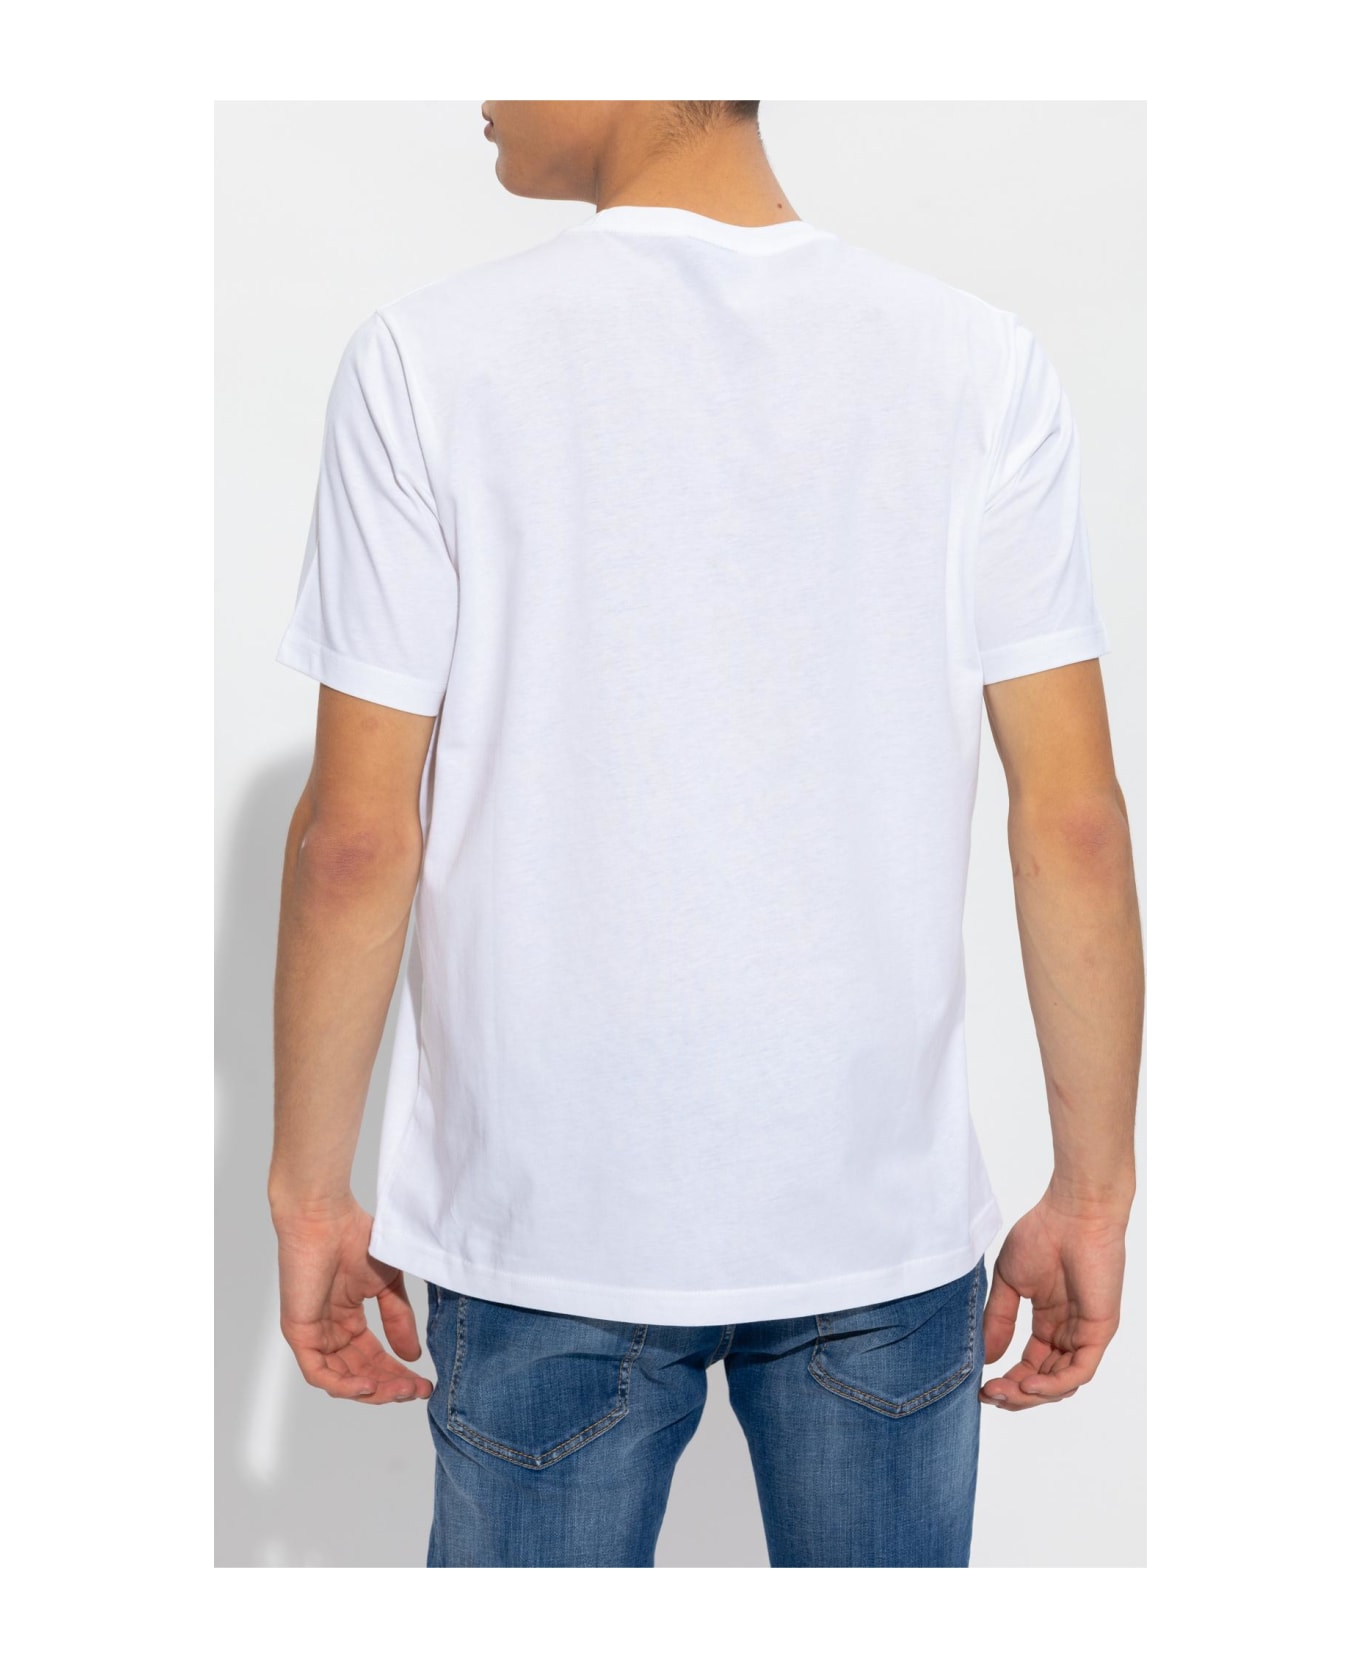 PS by Paul Smith Ps Paul Smith Printed T-shirt - White